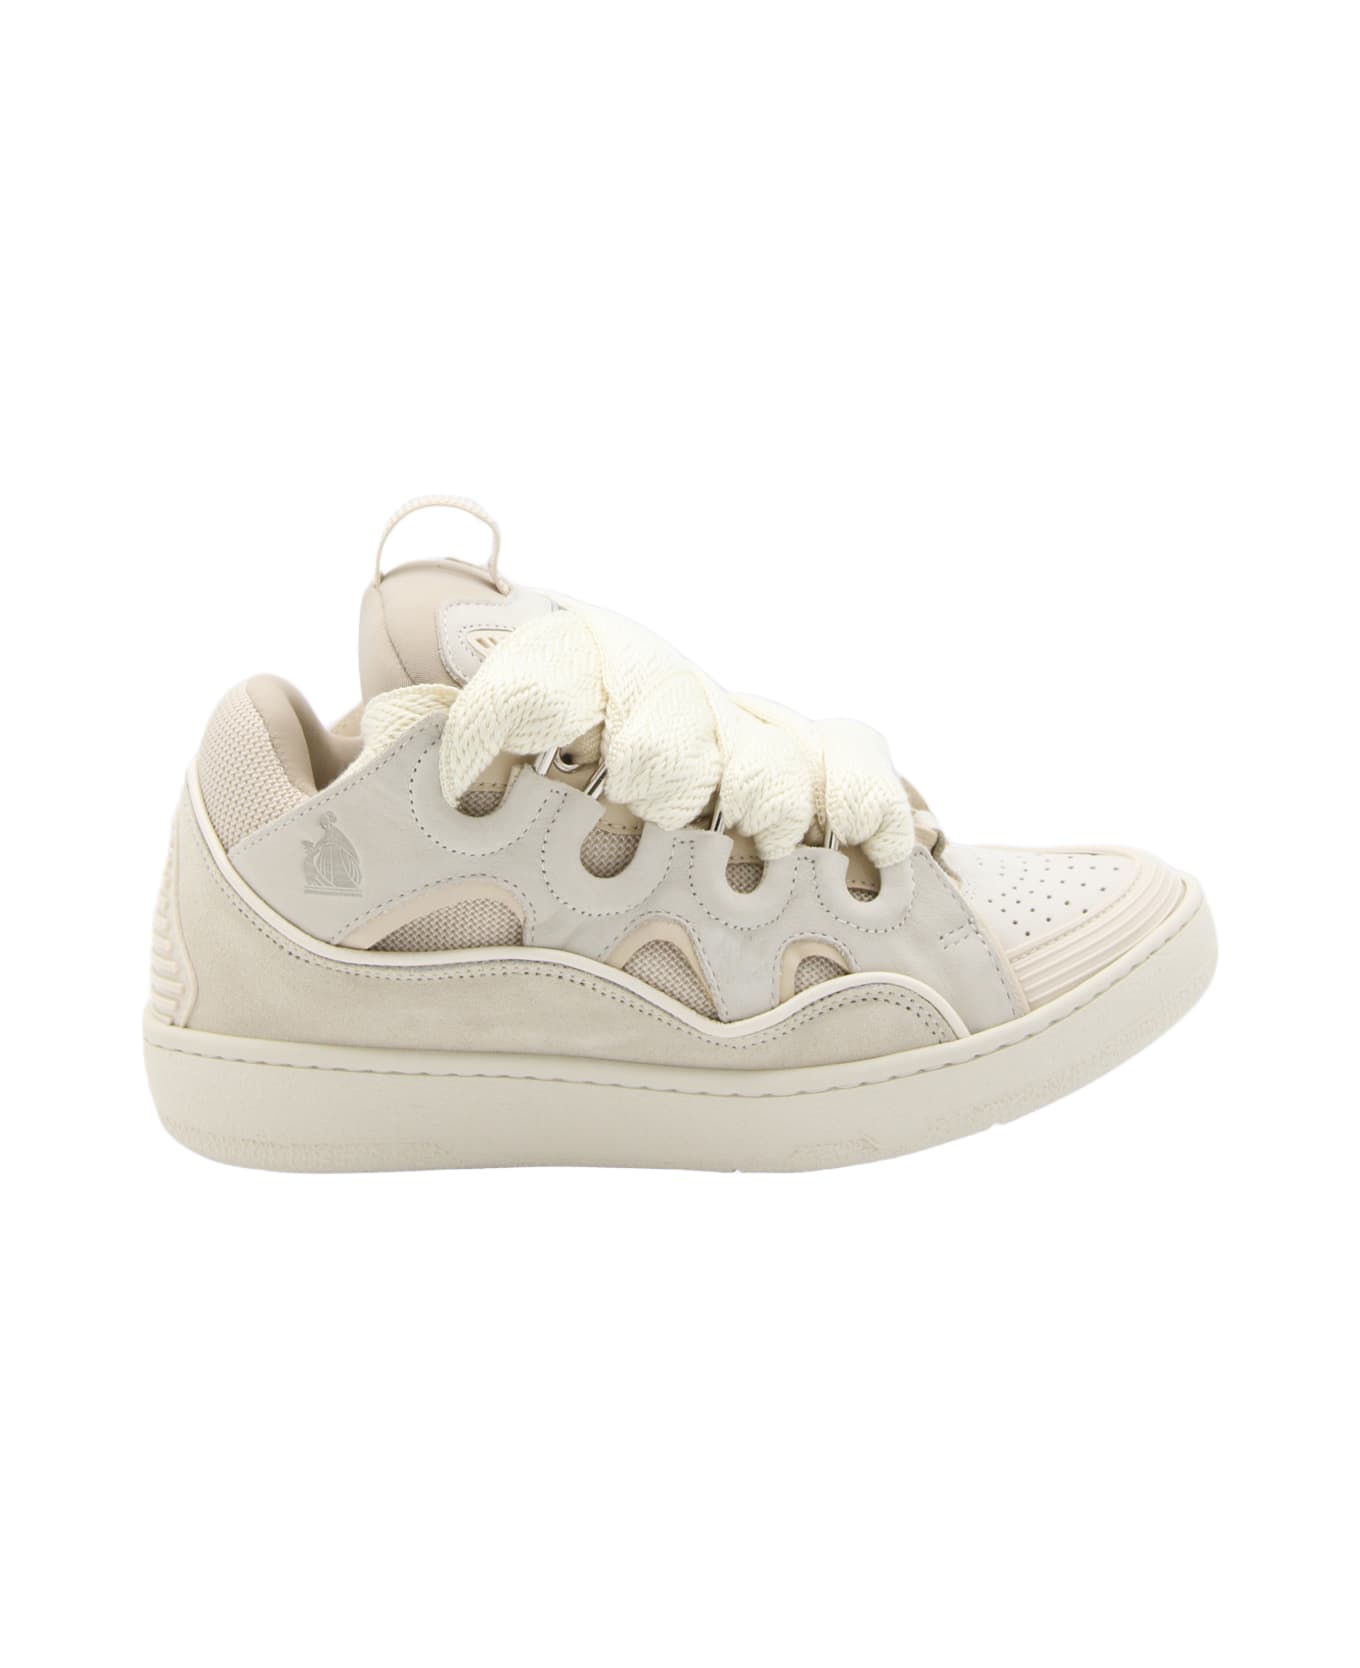 Lanvin White Leather Curb Sneakers - PEACH スニーカー